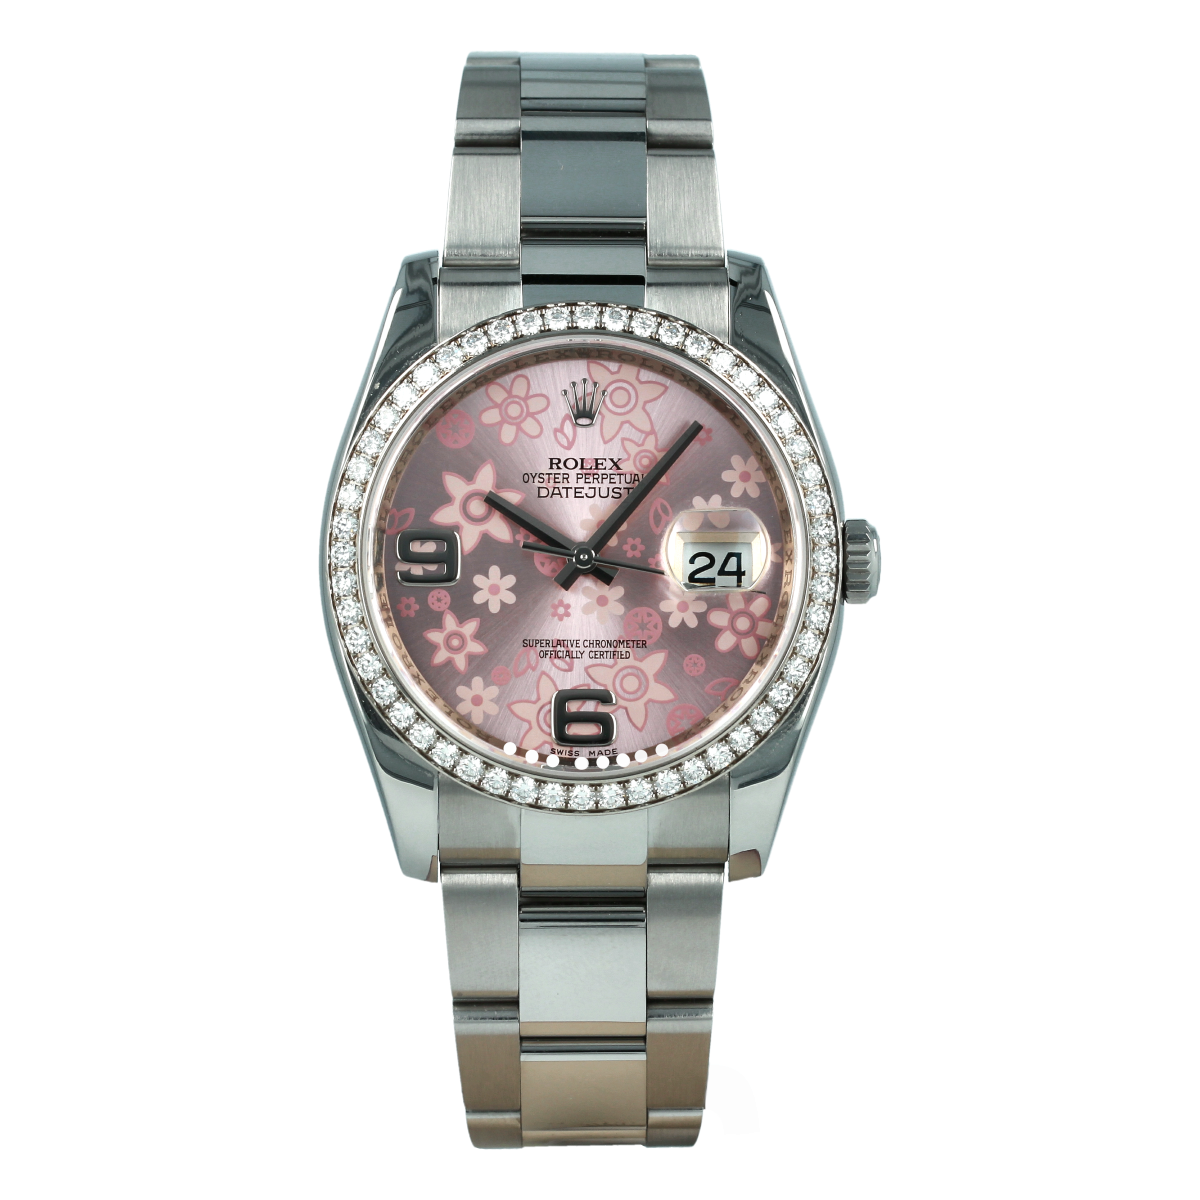 Rolex Datejust 116244 36mm Pink Floral Dial Diamond Bezel | Buy pre-owned Rolex watch